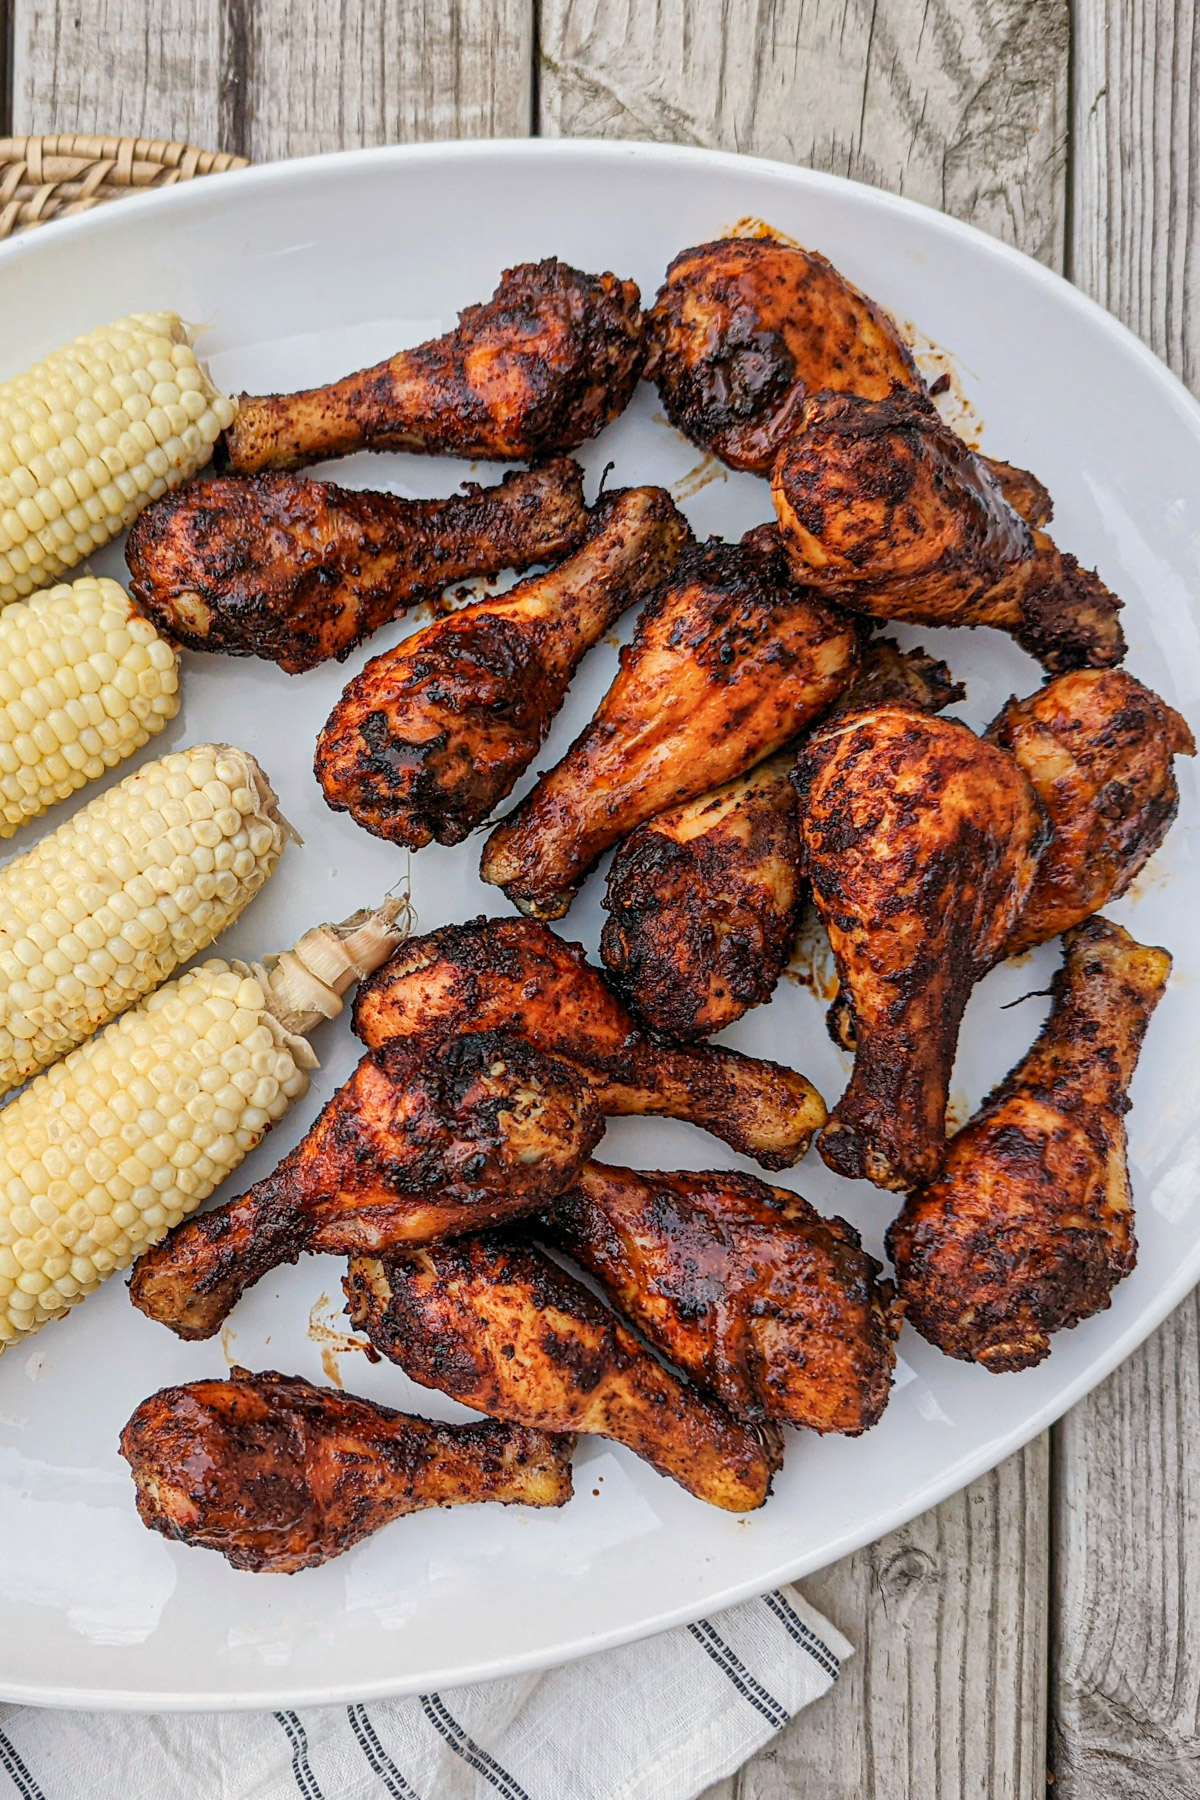 BBQ Baked Chicken Legs on a platter with corn.